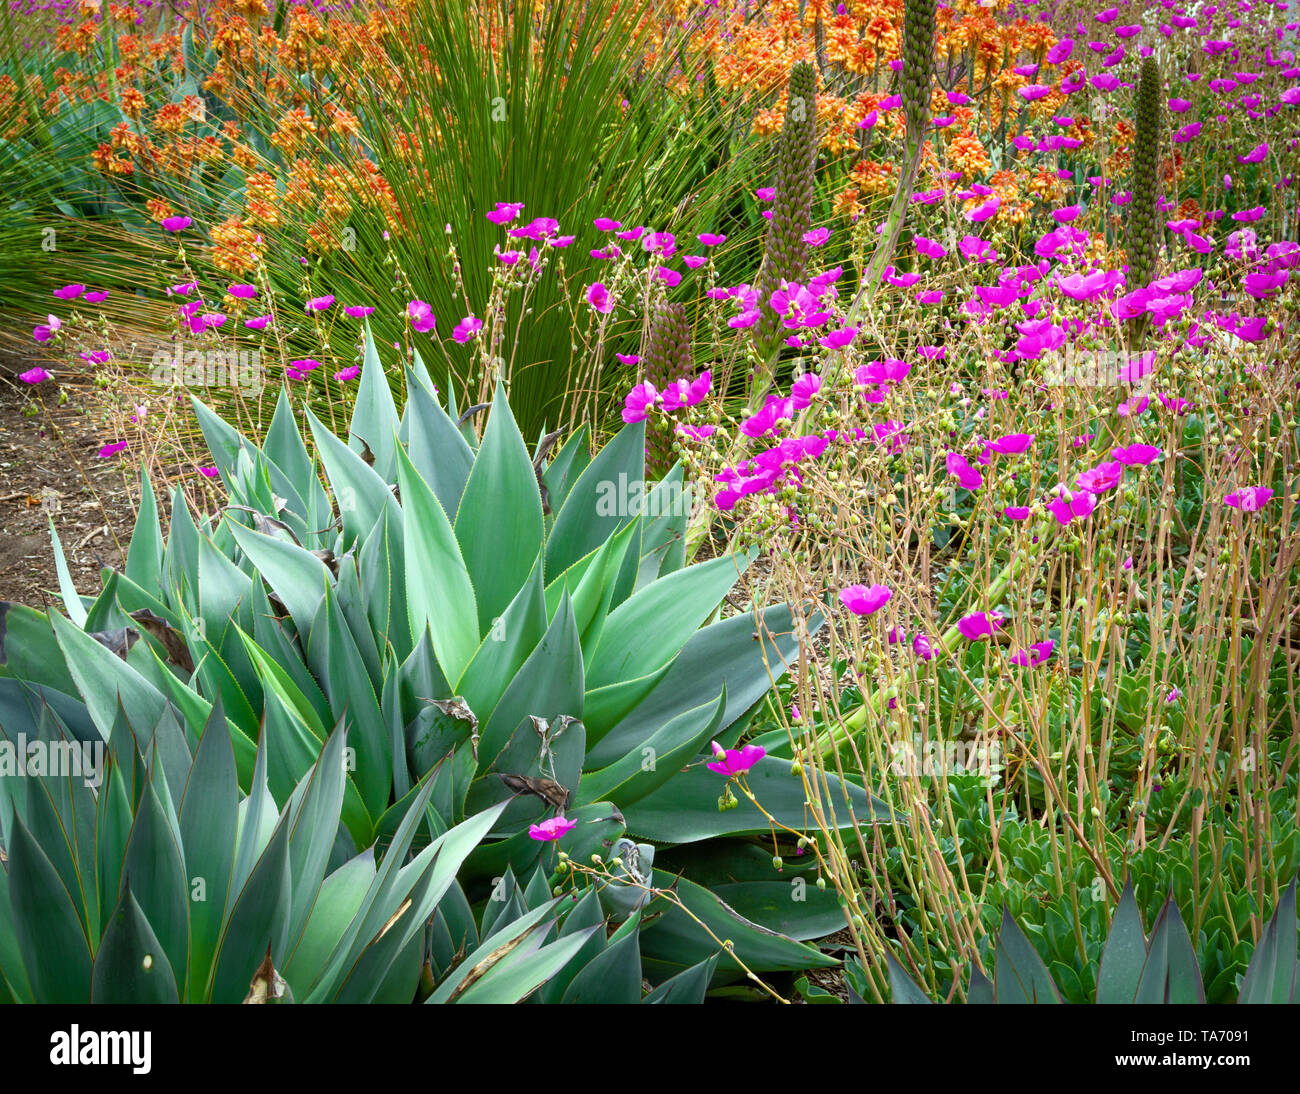 Agave garden with purple and orange flowers Stock Photo